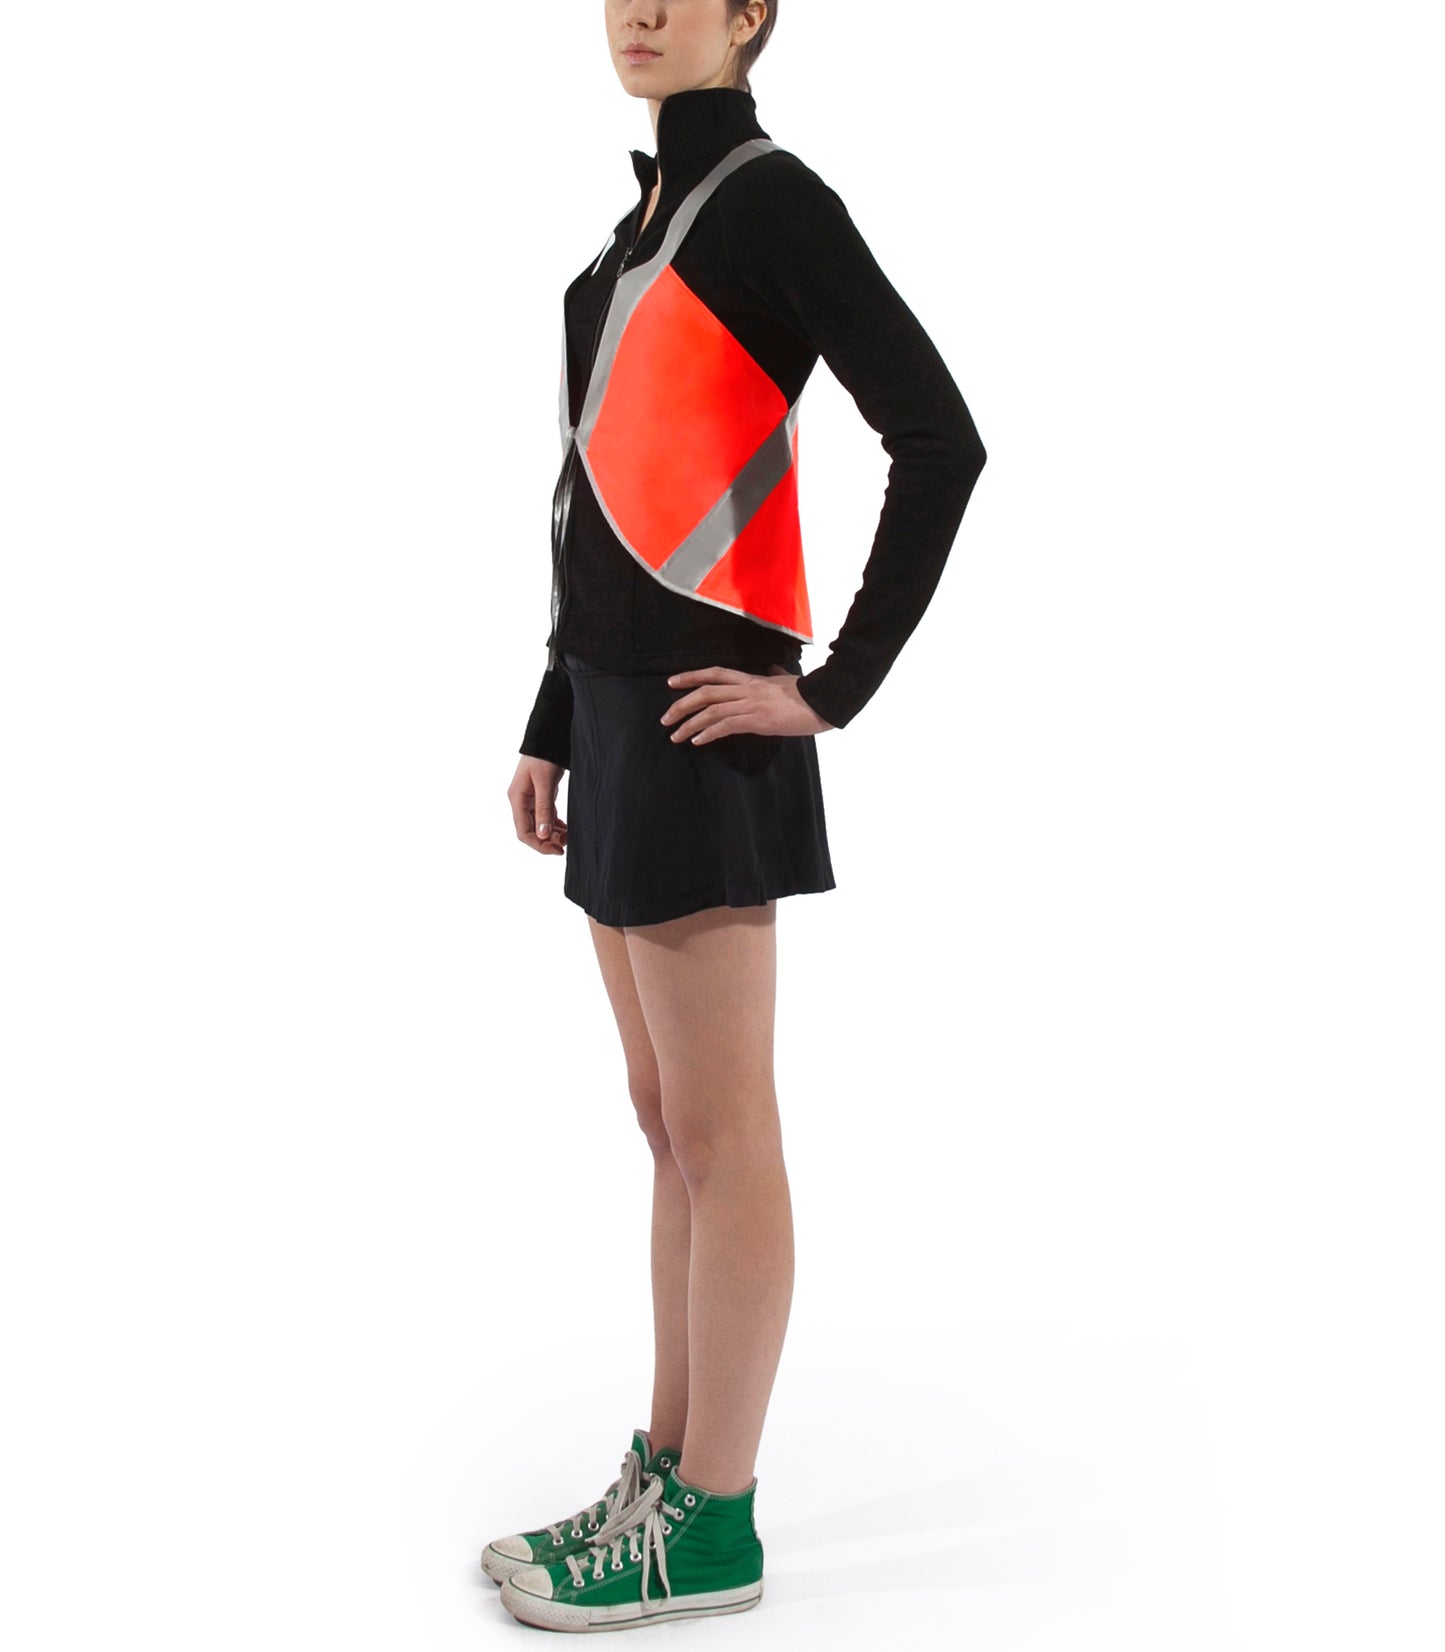 model wears cute vespert eco flame neon orange stylish reflective hi vis safety vest for women reflecting clothing high visibility gear accessory womens fashion bike ebike cycling walk run running dog walking walker night sustainable nighttime bright made of eco-circle recycled polyester and 360 3M scotchlite material in NYC USA designed to be seen day and night packable